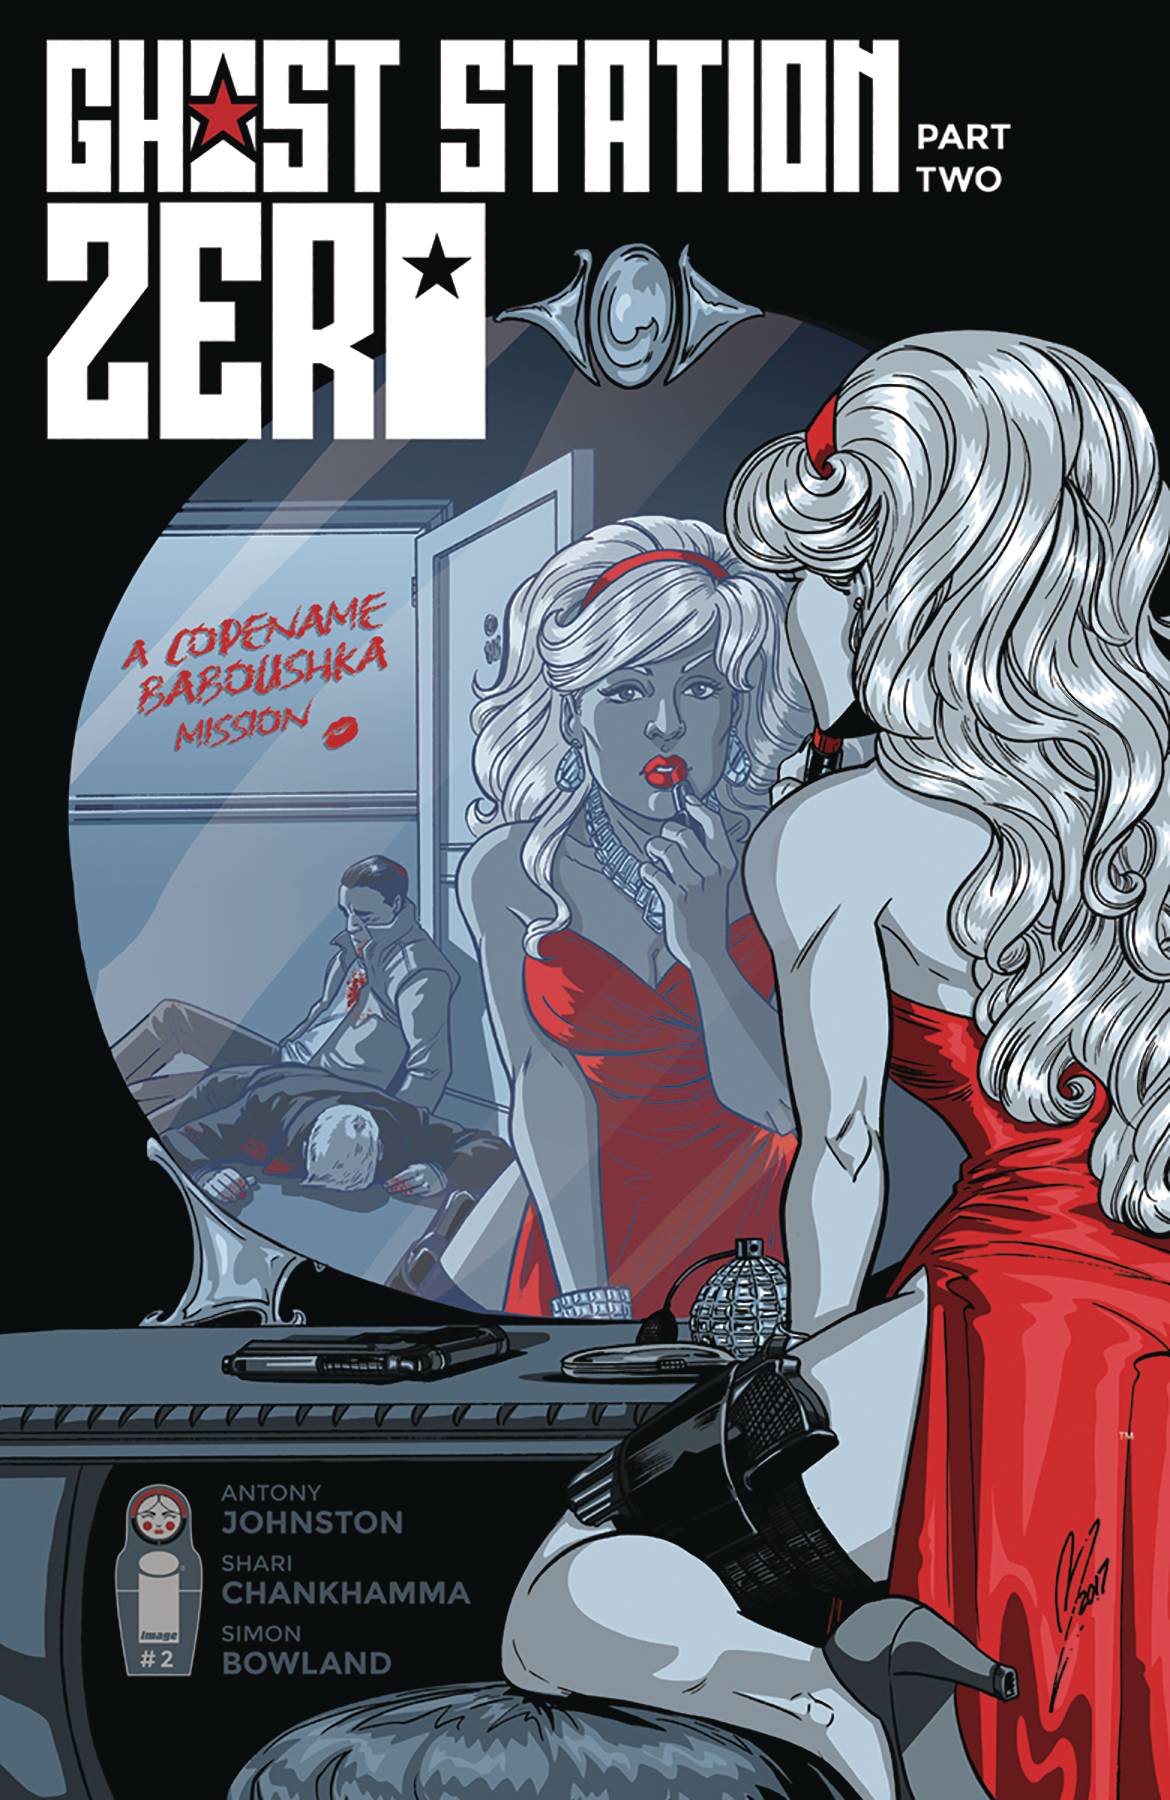 Ghost Station Zero #2 Cover B Levens